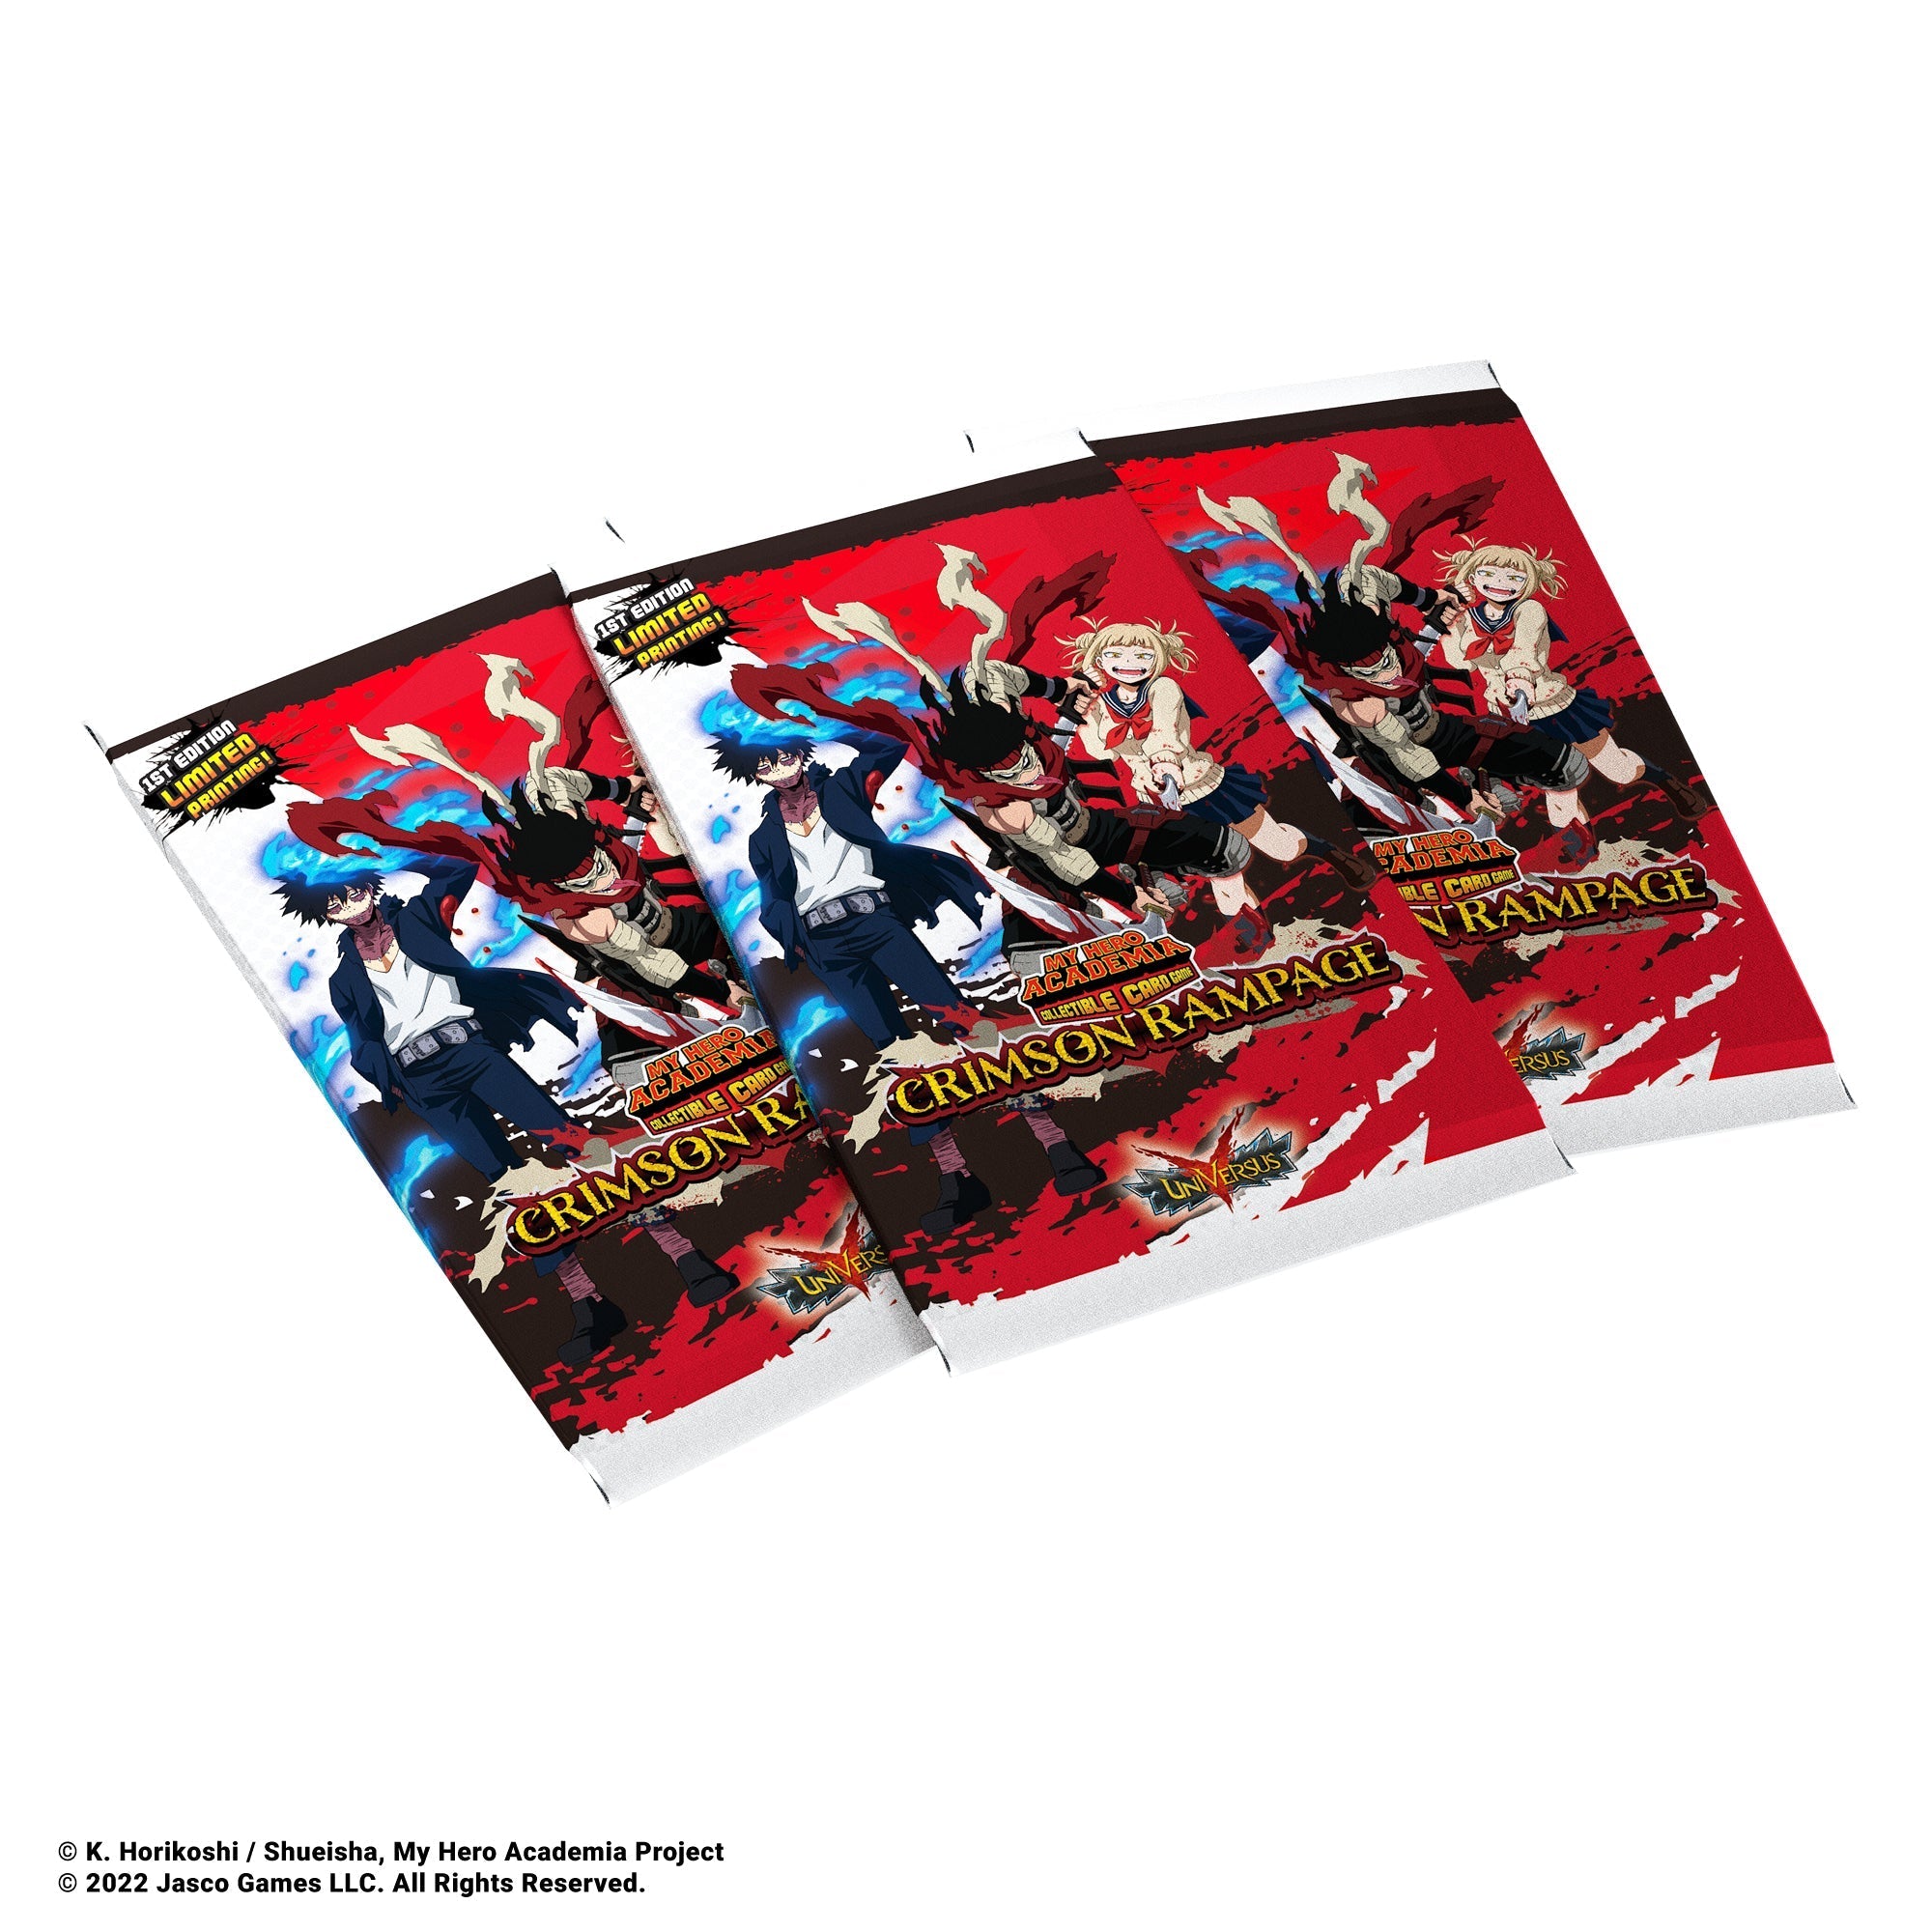 My Hero Academia - Collectible Card Game Series 2: Crimson Rampage Booster Box image count 5